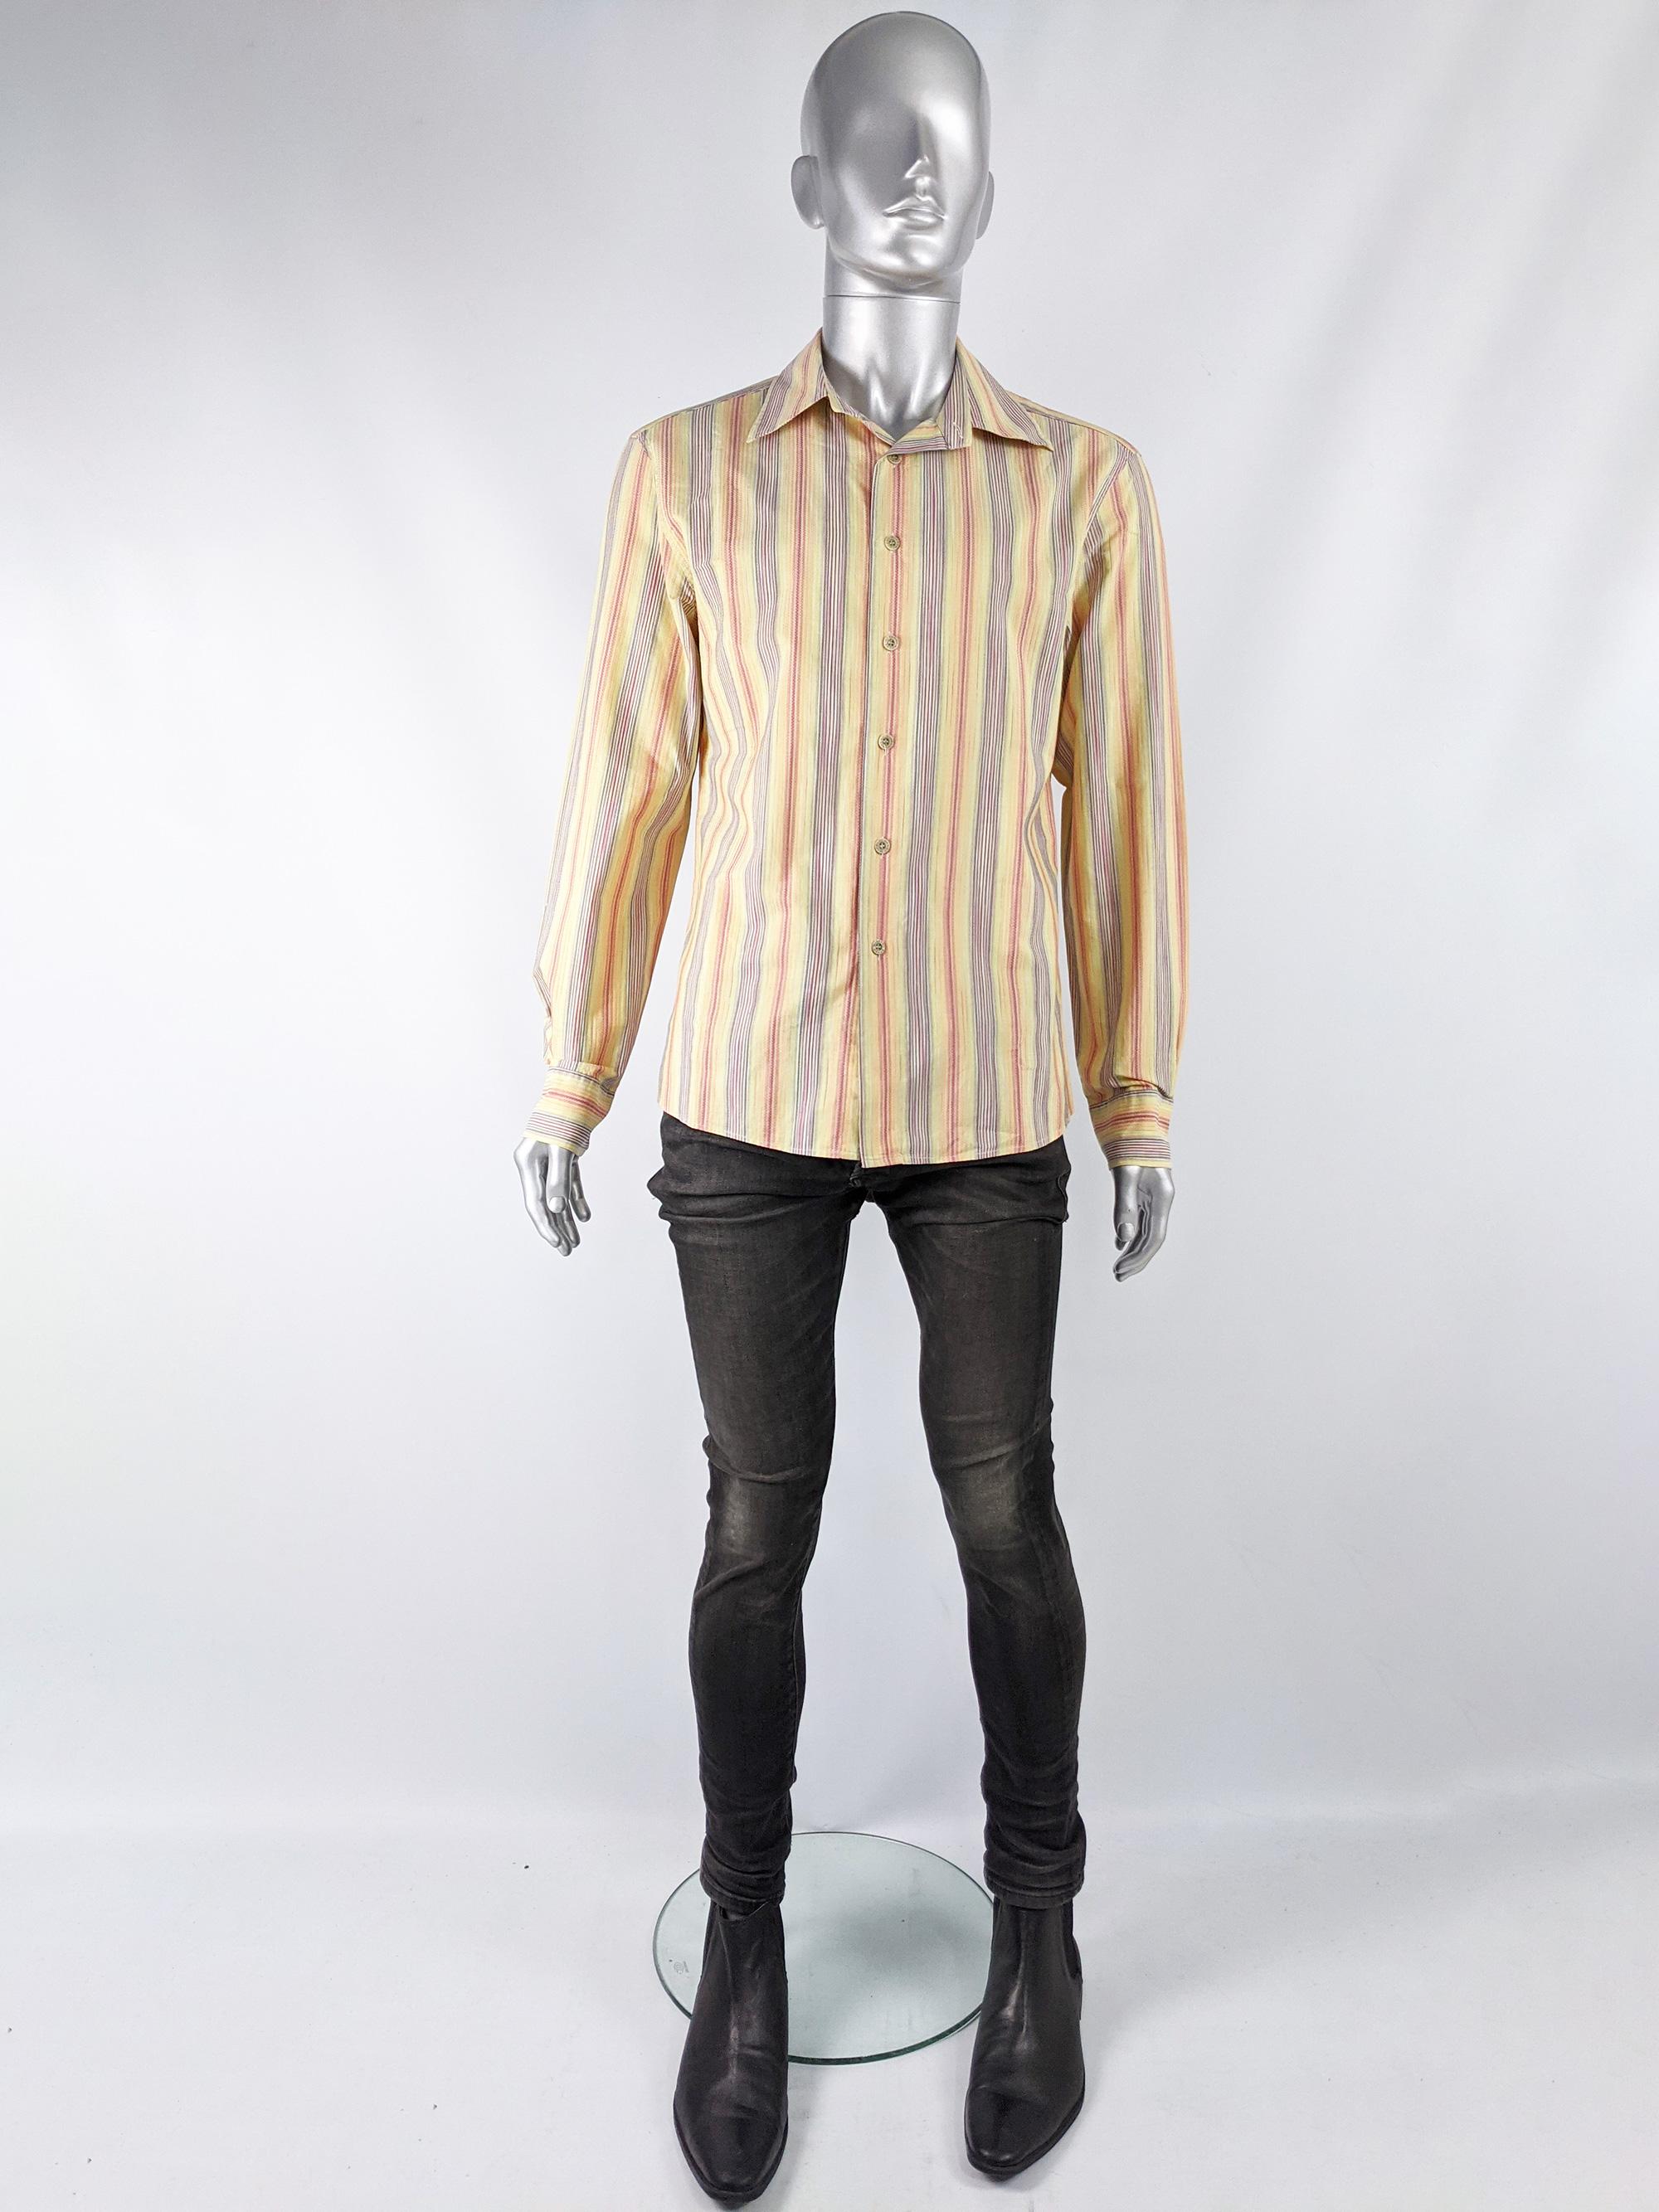 A stylish vintage mens long sleeved shirt from the late 90s by luxury Italian fashion house, Missoni for their Sport line. In a multicolored, striped cotton with a zig zag texture throughout and long sleeves.

Size: Marked IT 50 which equates to a